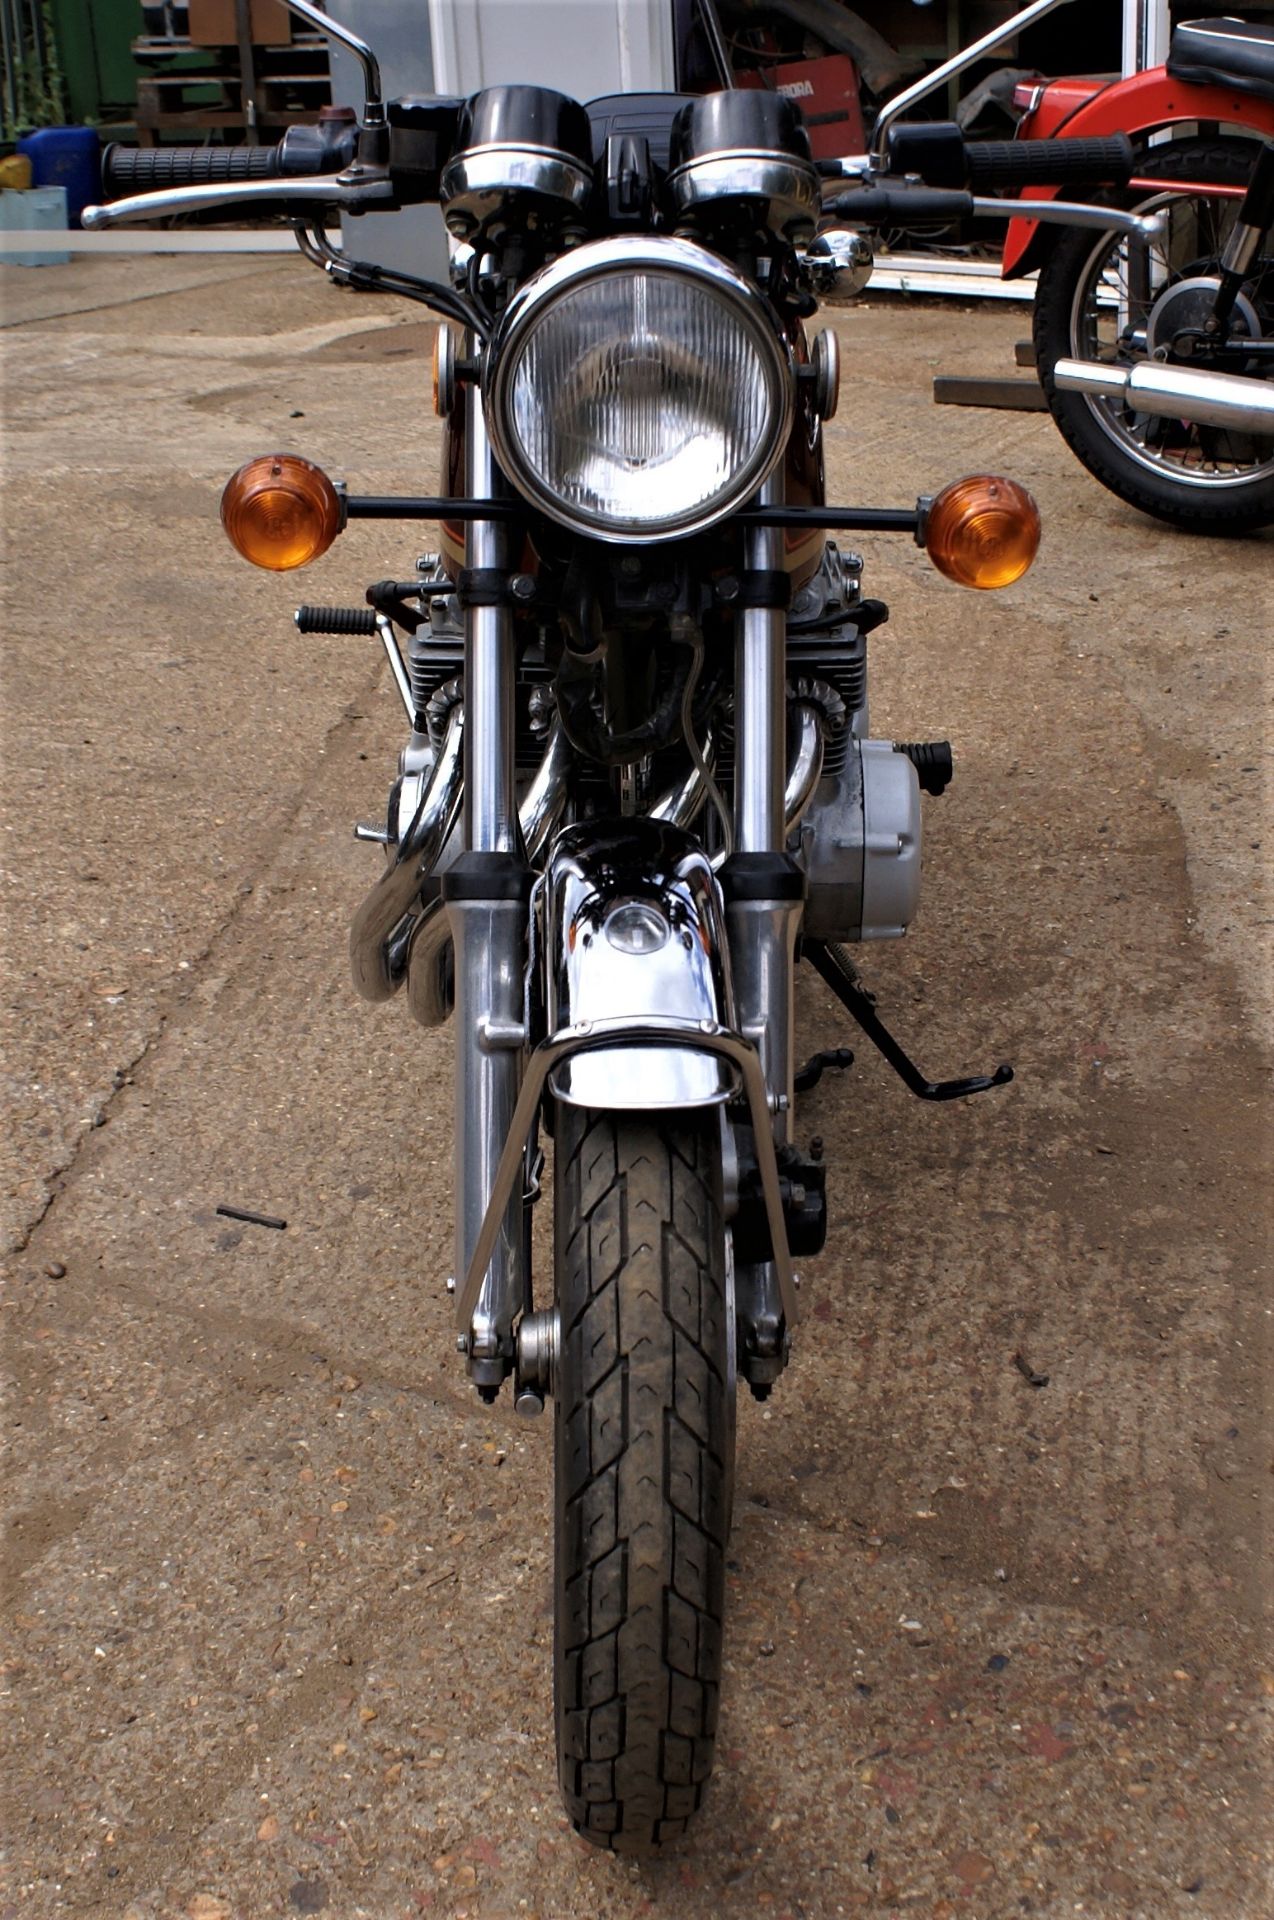 1970 HONDA 400 FOUR Registration Number: XGK 507S   Frame Number: TBA  Rightly regarded as one of - Image 4 of 5